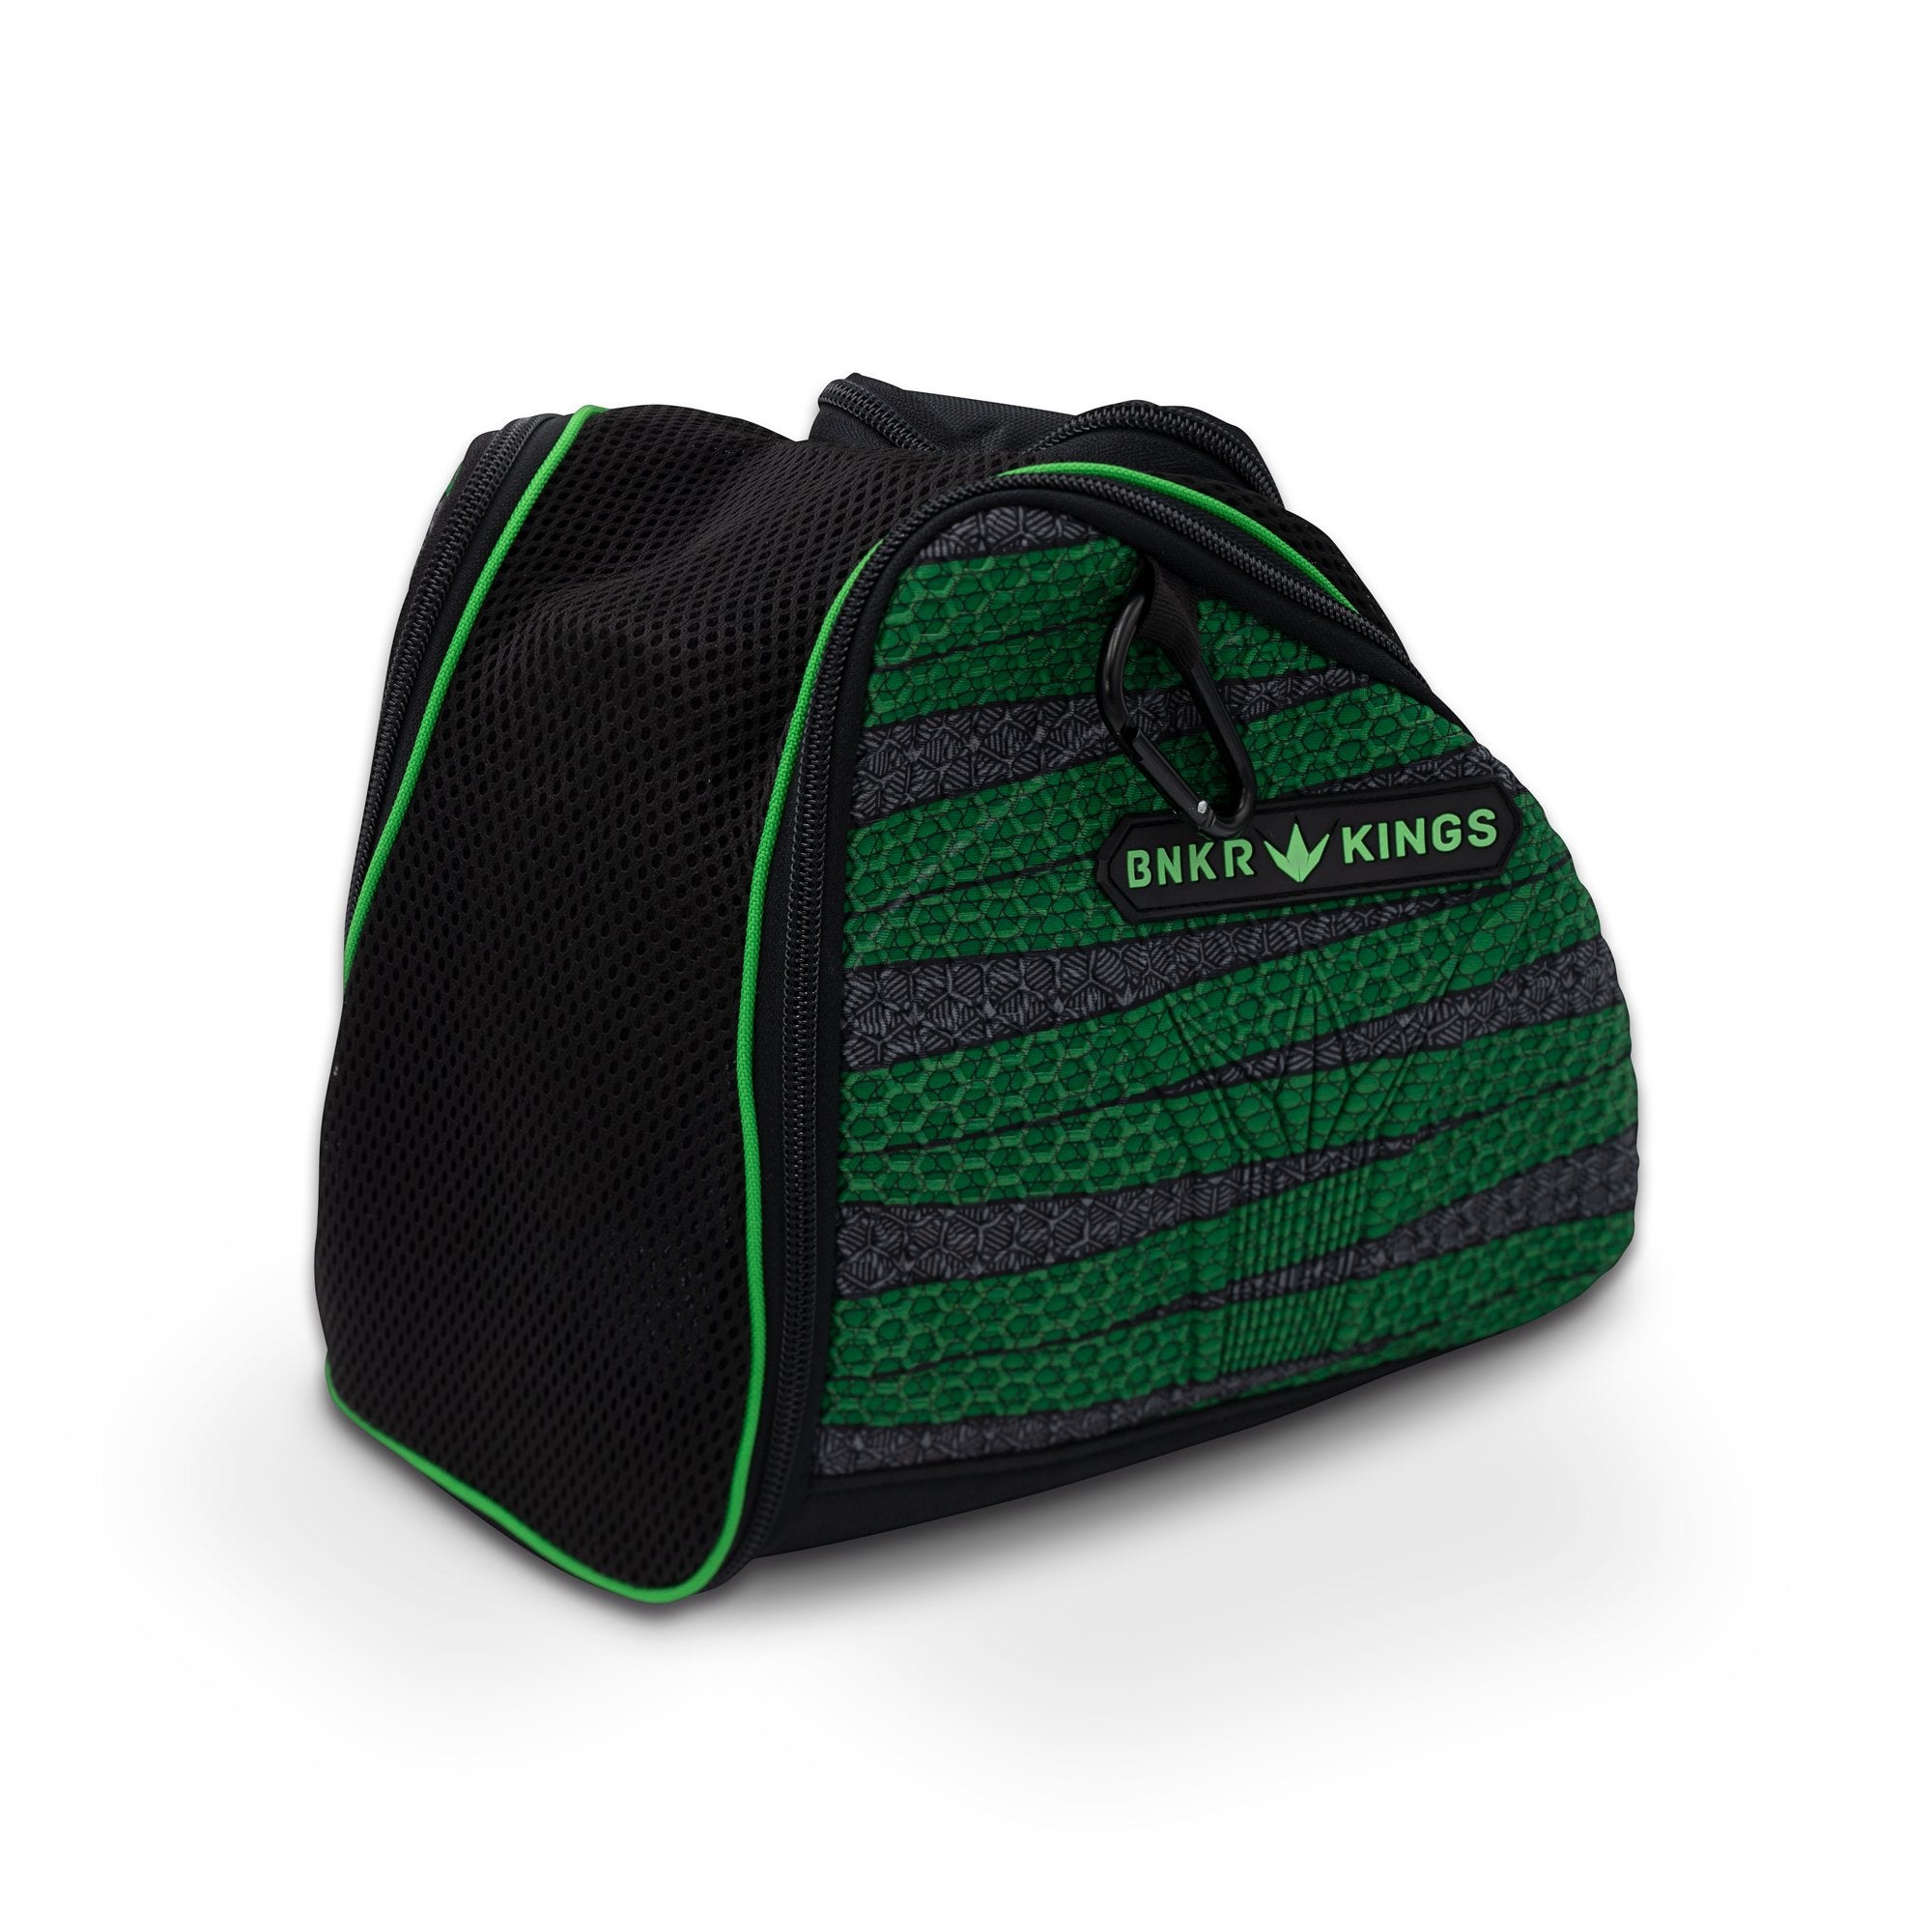 Bunkerkings Supreme Goggle Bag - Lime Laces